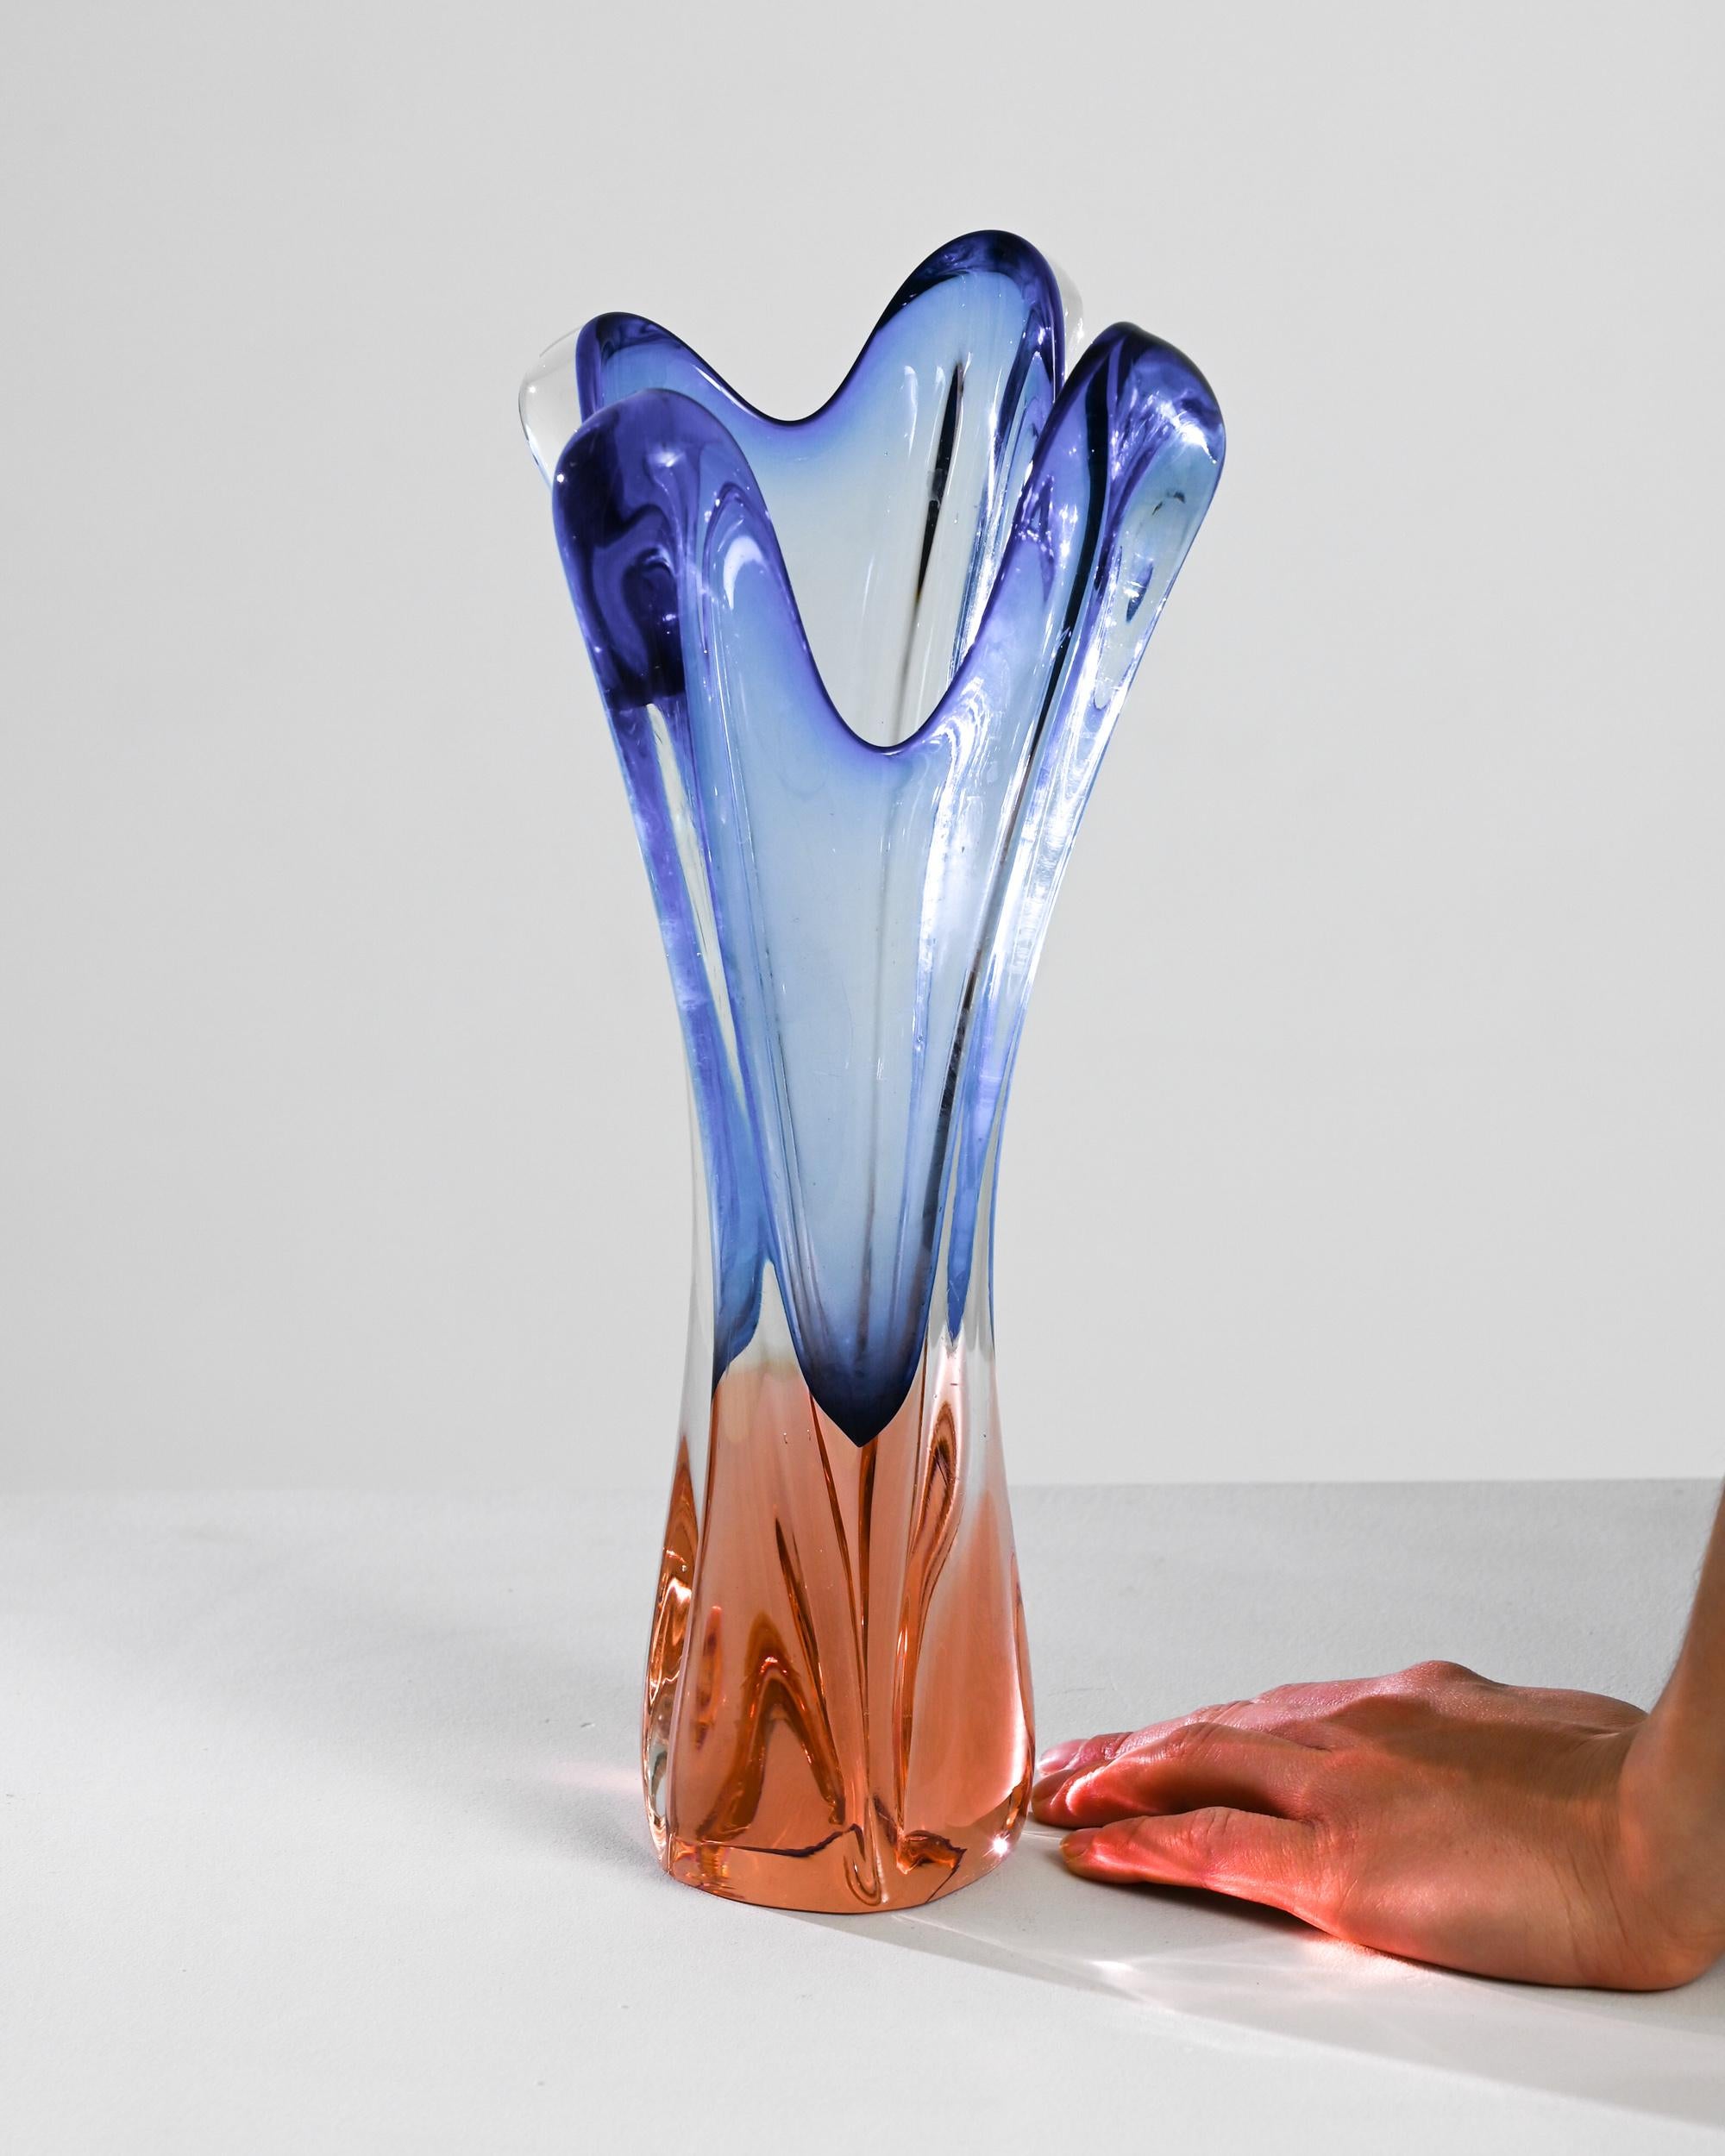 This 20th Century Belgian vase is an exquisite manifestation of glass artistry, showcasing a mesmerizing blend of blue and orange hues. Its unique form, reminiscent of a flame, rises with an elegant fluidity that is both dynamic and serene. The